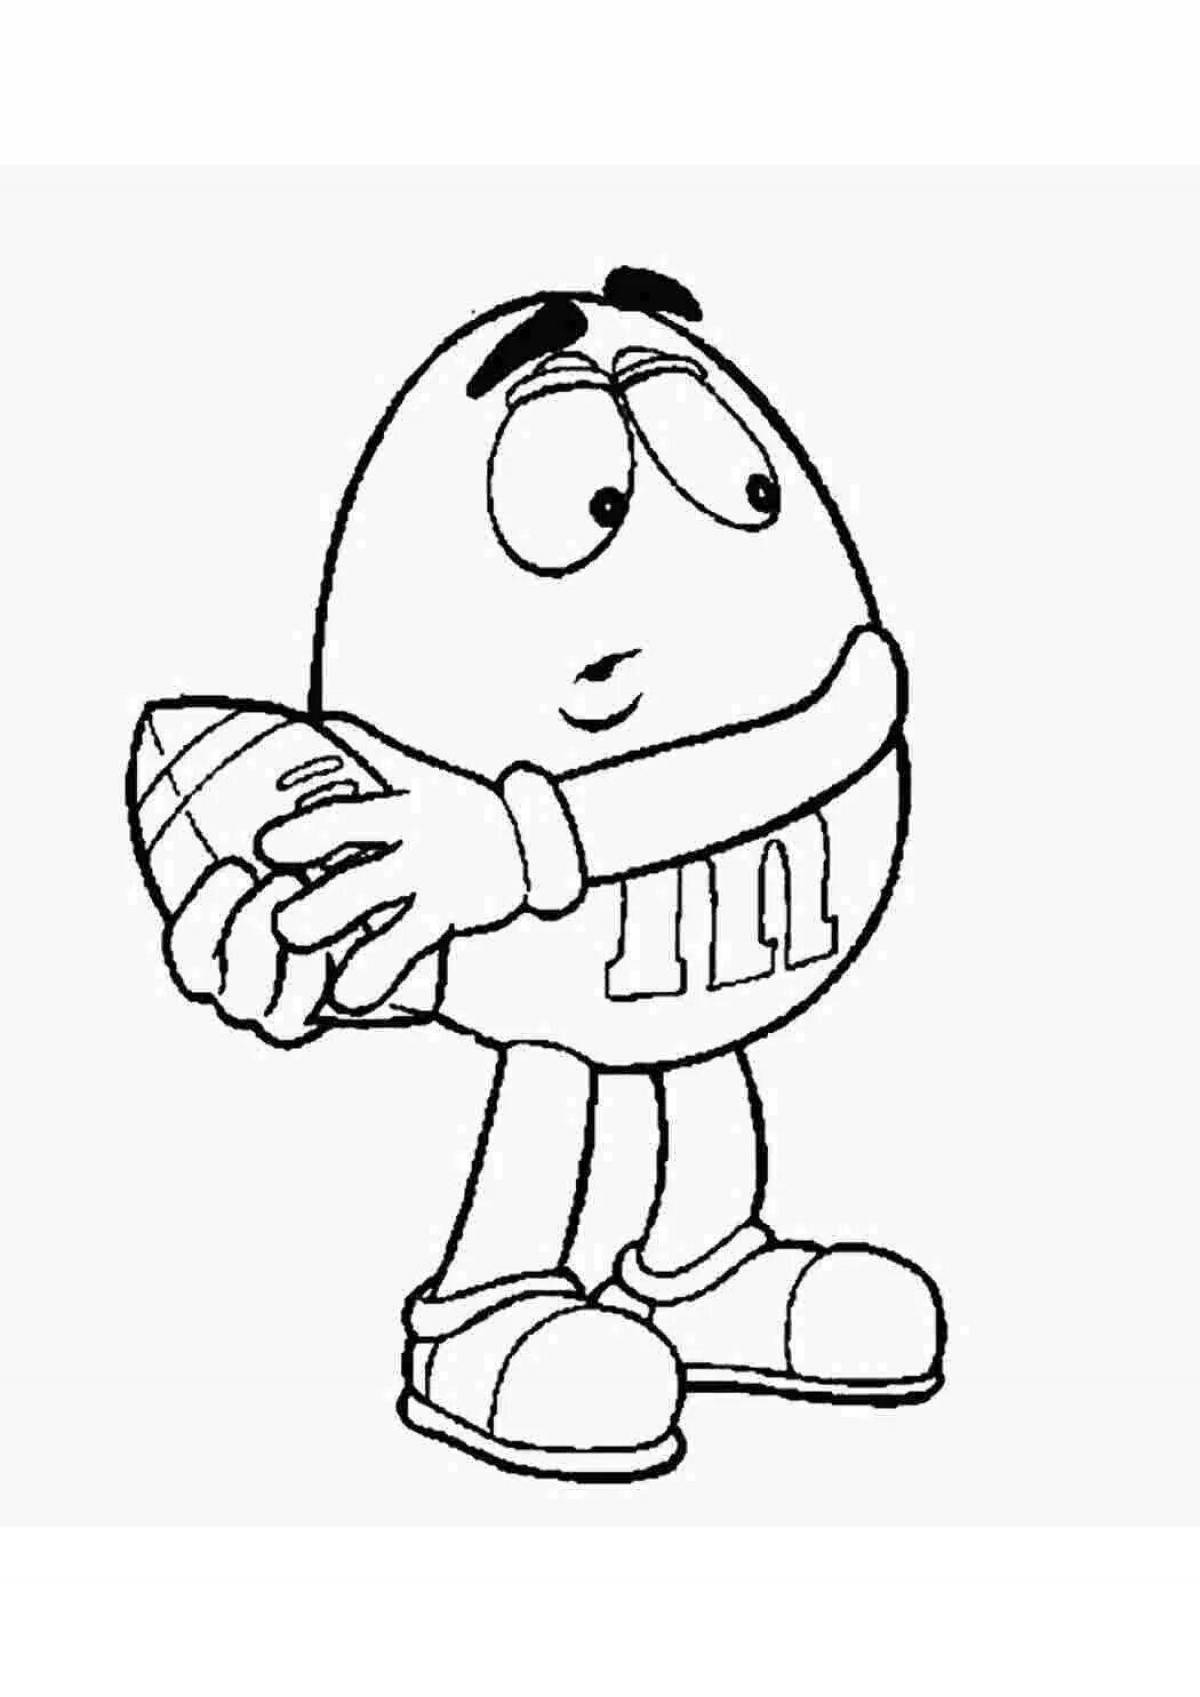 Fun m&ms coloring pages